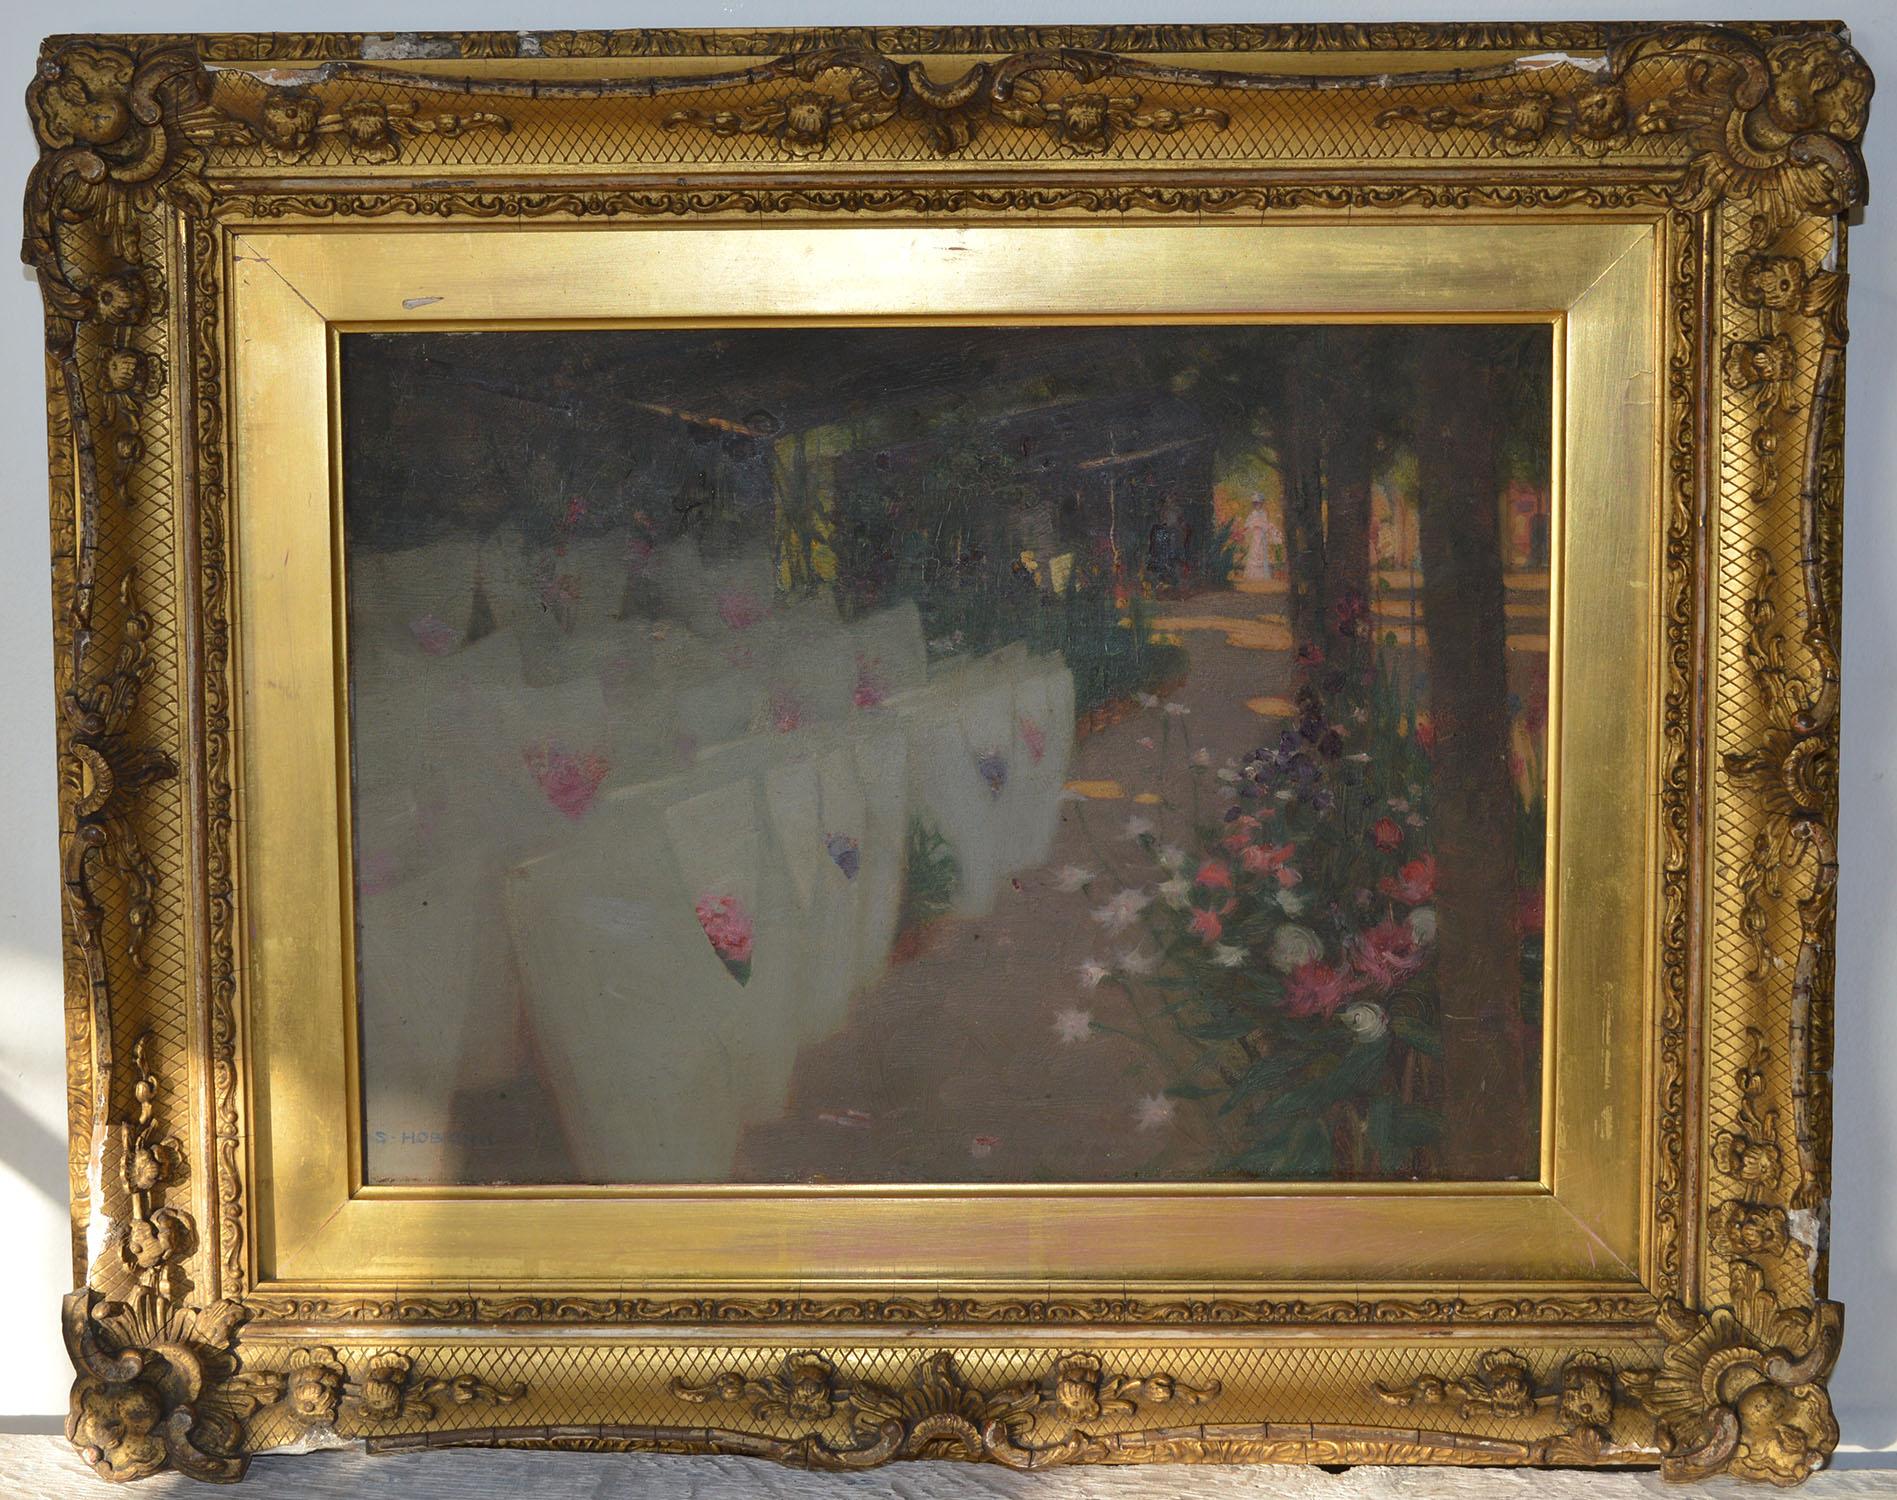 Lovely painting of a distant female figure in a Paris flower market

By Scottish artist Stuart Hobkirk

It reminds me of work by the Scottish Colorists

In unrestored condition.

Oil on board

Original gilt gesso frame. Frame needs